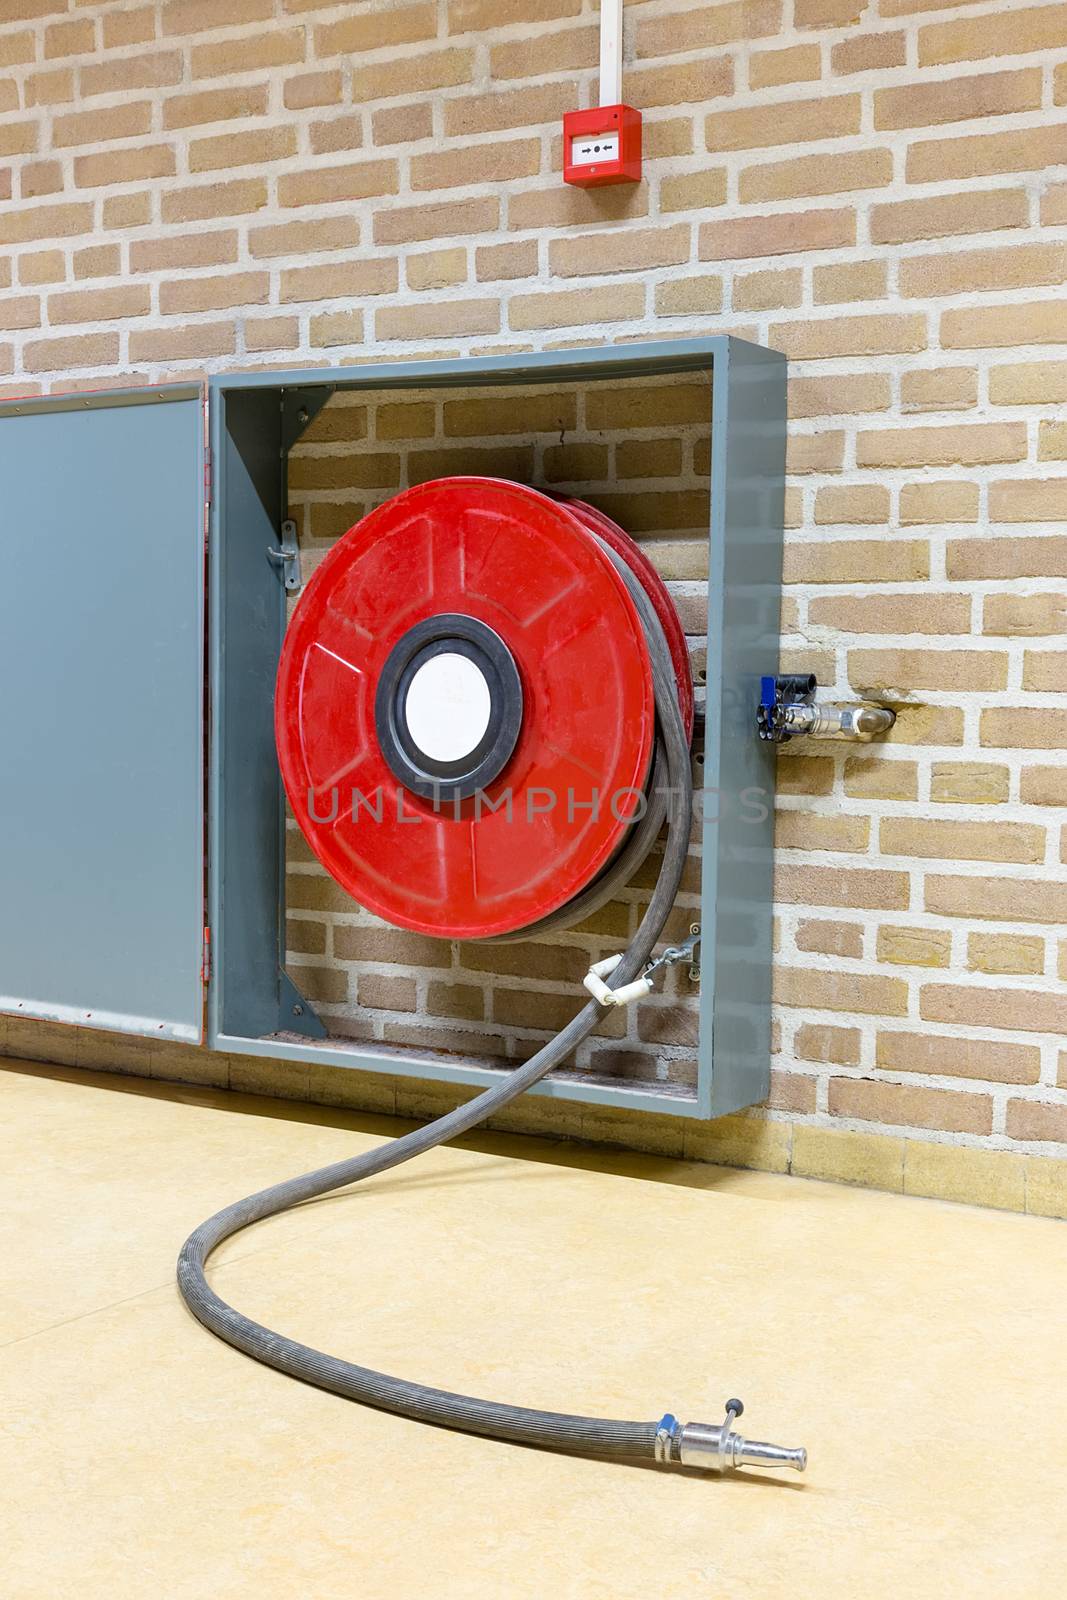 Red fire hose on reel at wall by BenSchonewille